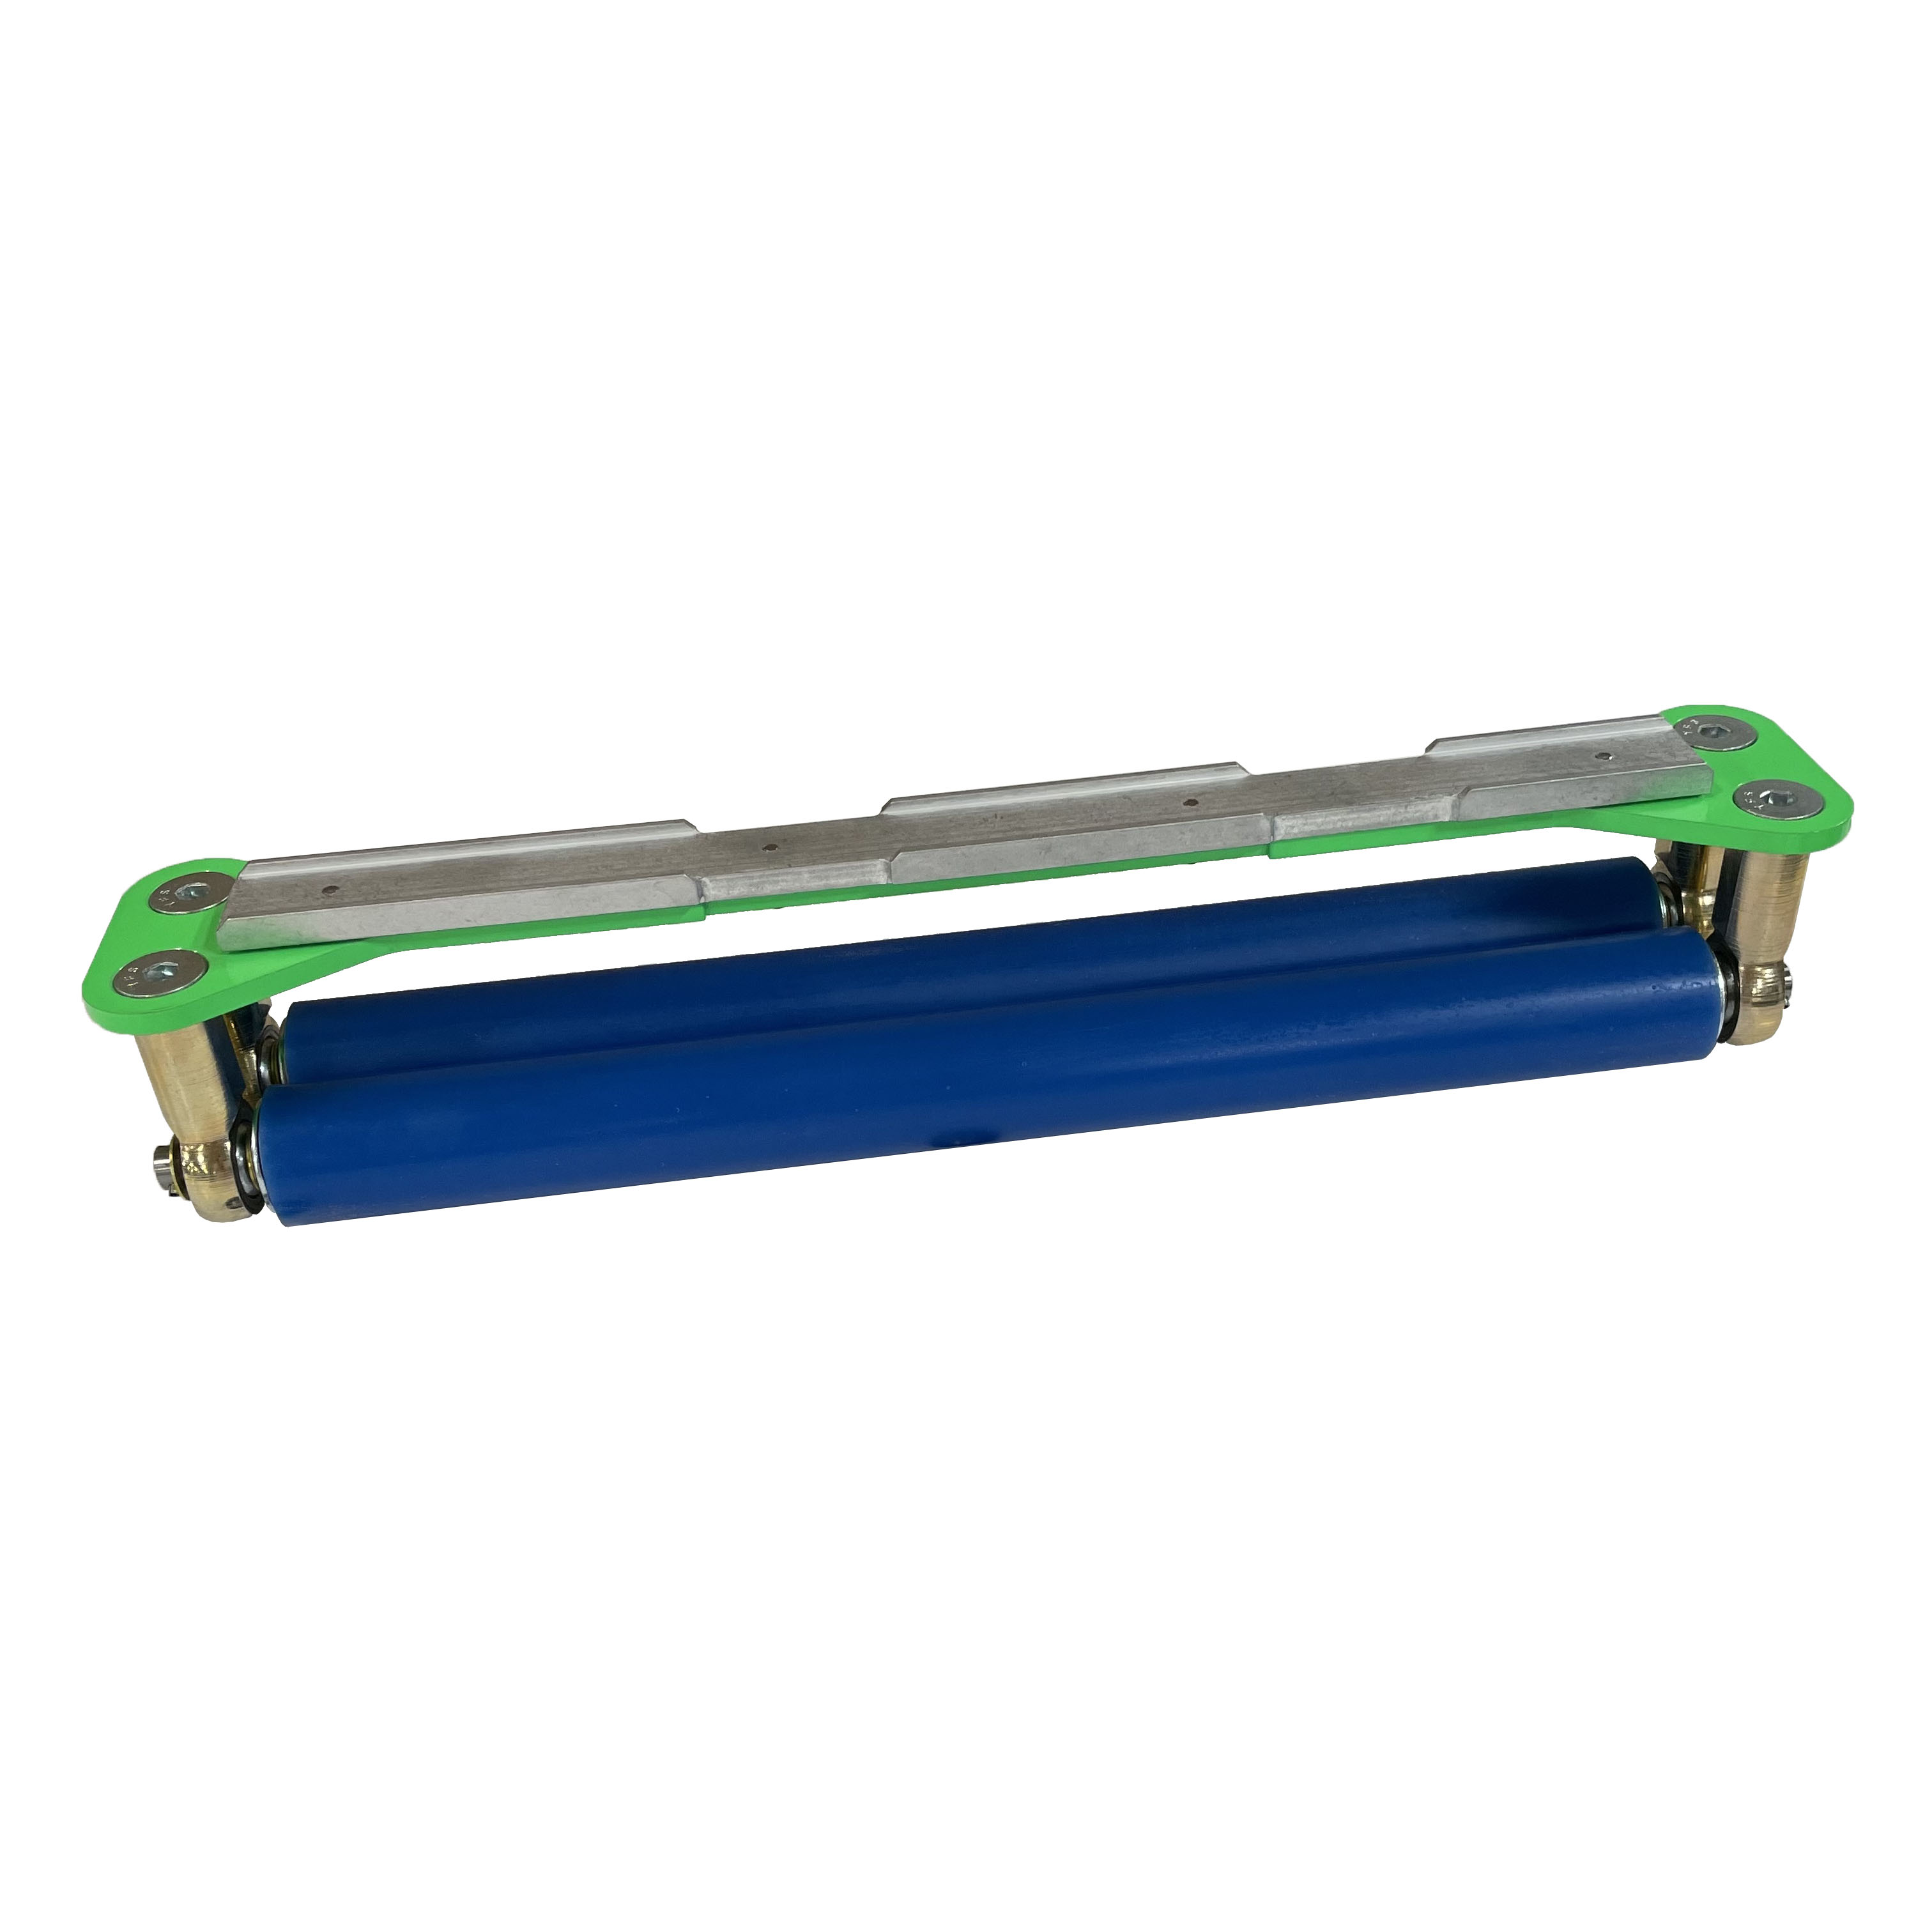 Action Engineering MHM® Roller Squeegee - SPSI Inc.